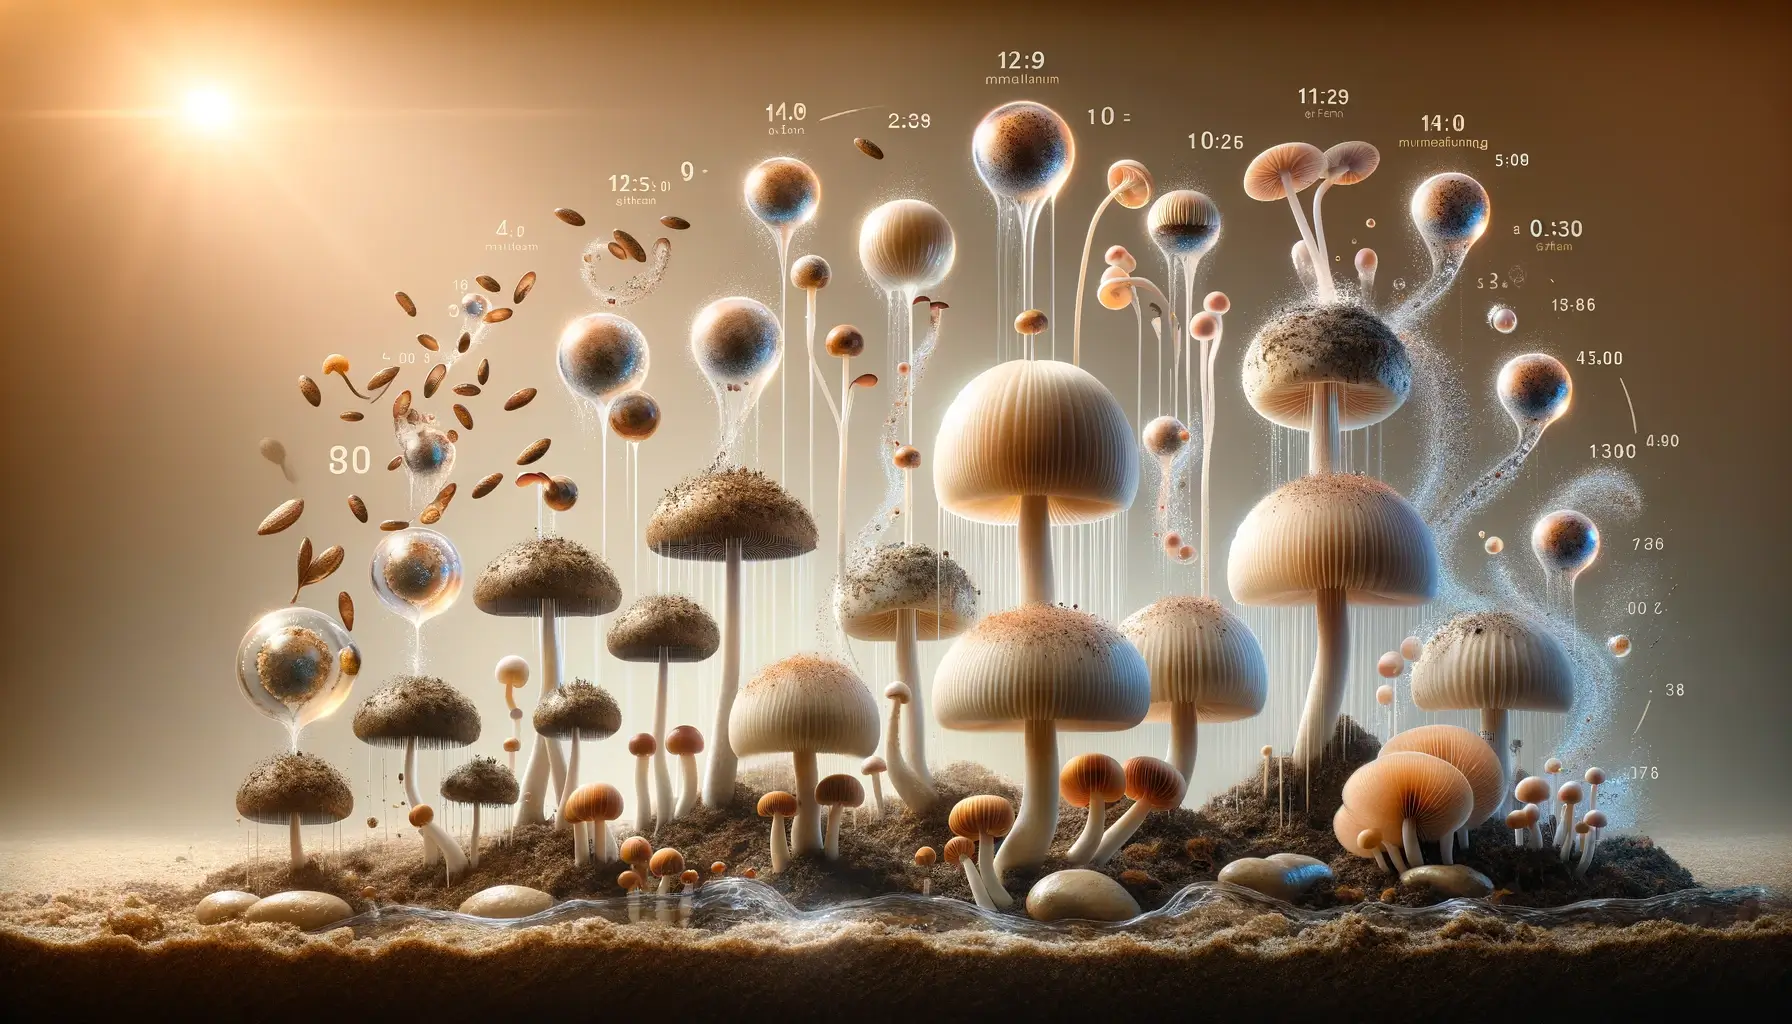 Serene depiction of mushroom spores colonizing, showcasing growth stages in a natural setting.